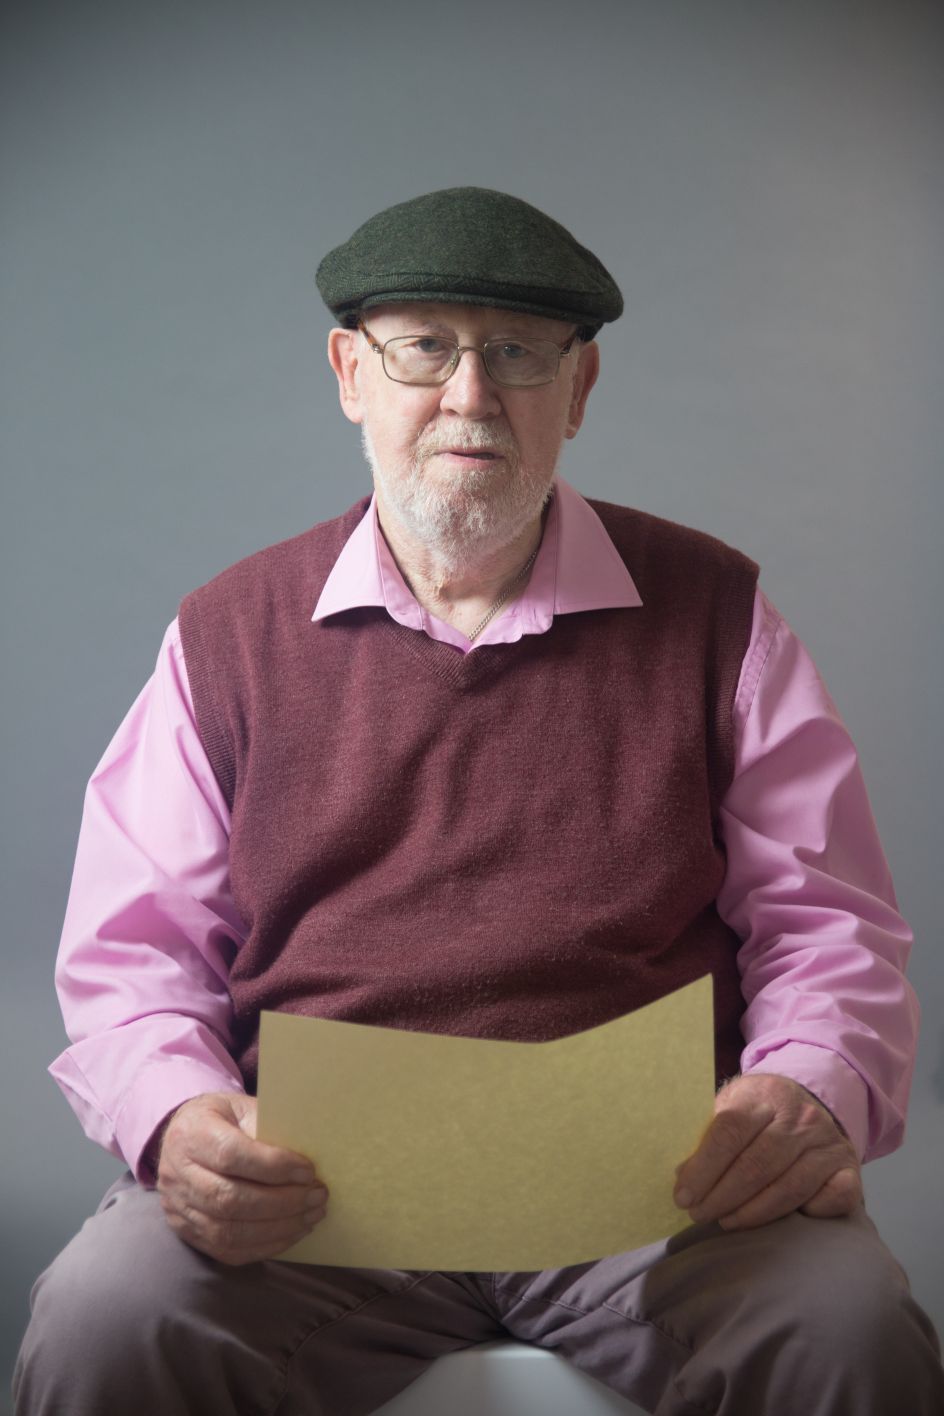 Richard Lucas Thamesmead, 2018 Scarlett Crawford, 2018. “Richard used the parchment to show that the legislation has been too little and too late. Wearing his hat represents the contribution that the Irish working class has made to UK society. He was proud of his community and his contribution as a local councillor.” © UK Parliament